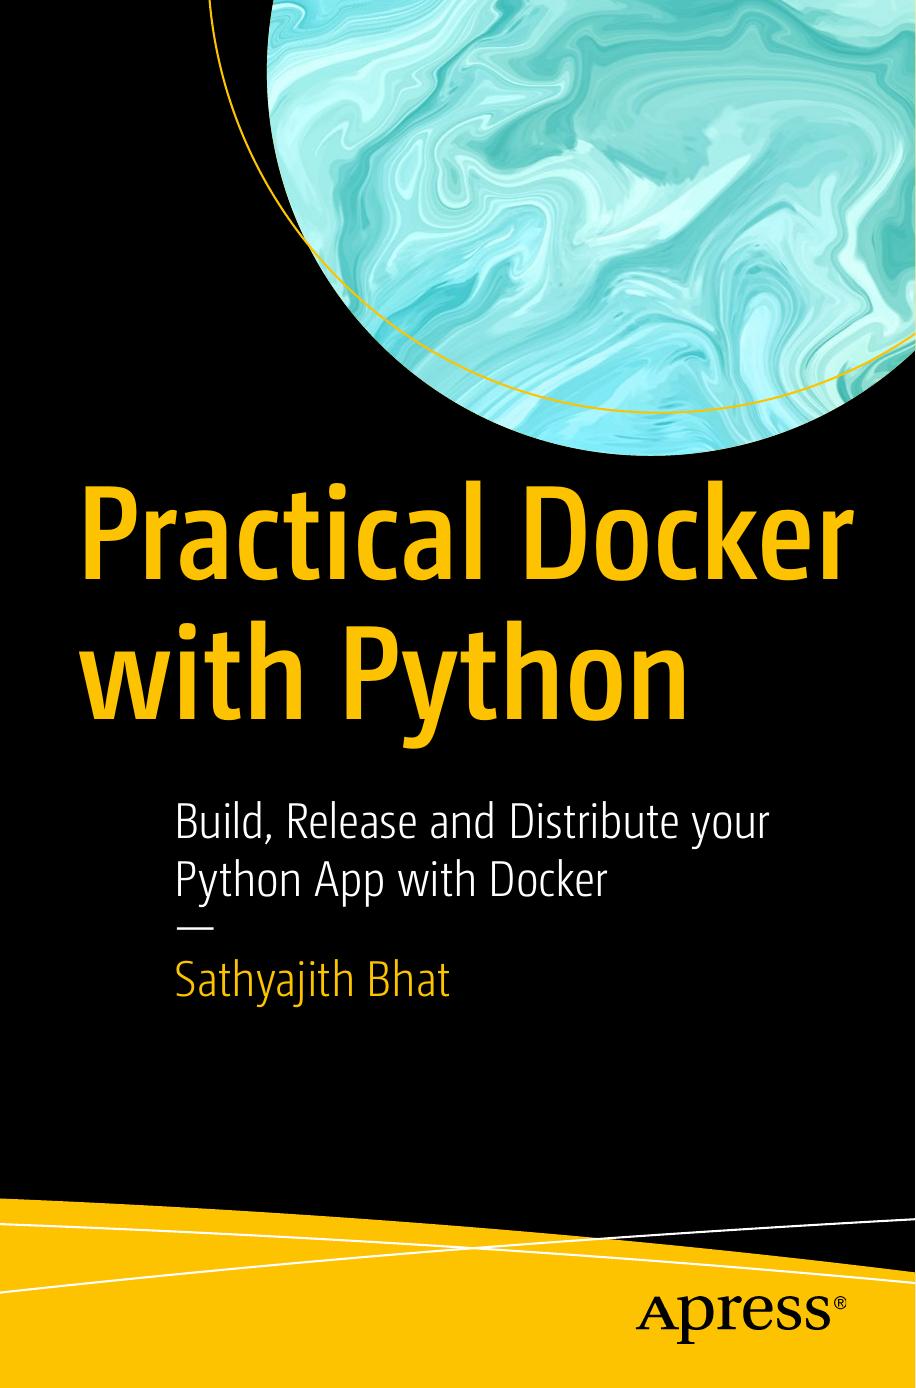 Practical Docker with Python by Sathyajith Bhat (z-lib.org)